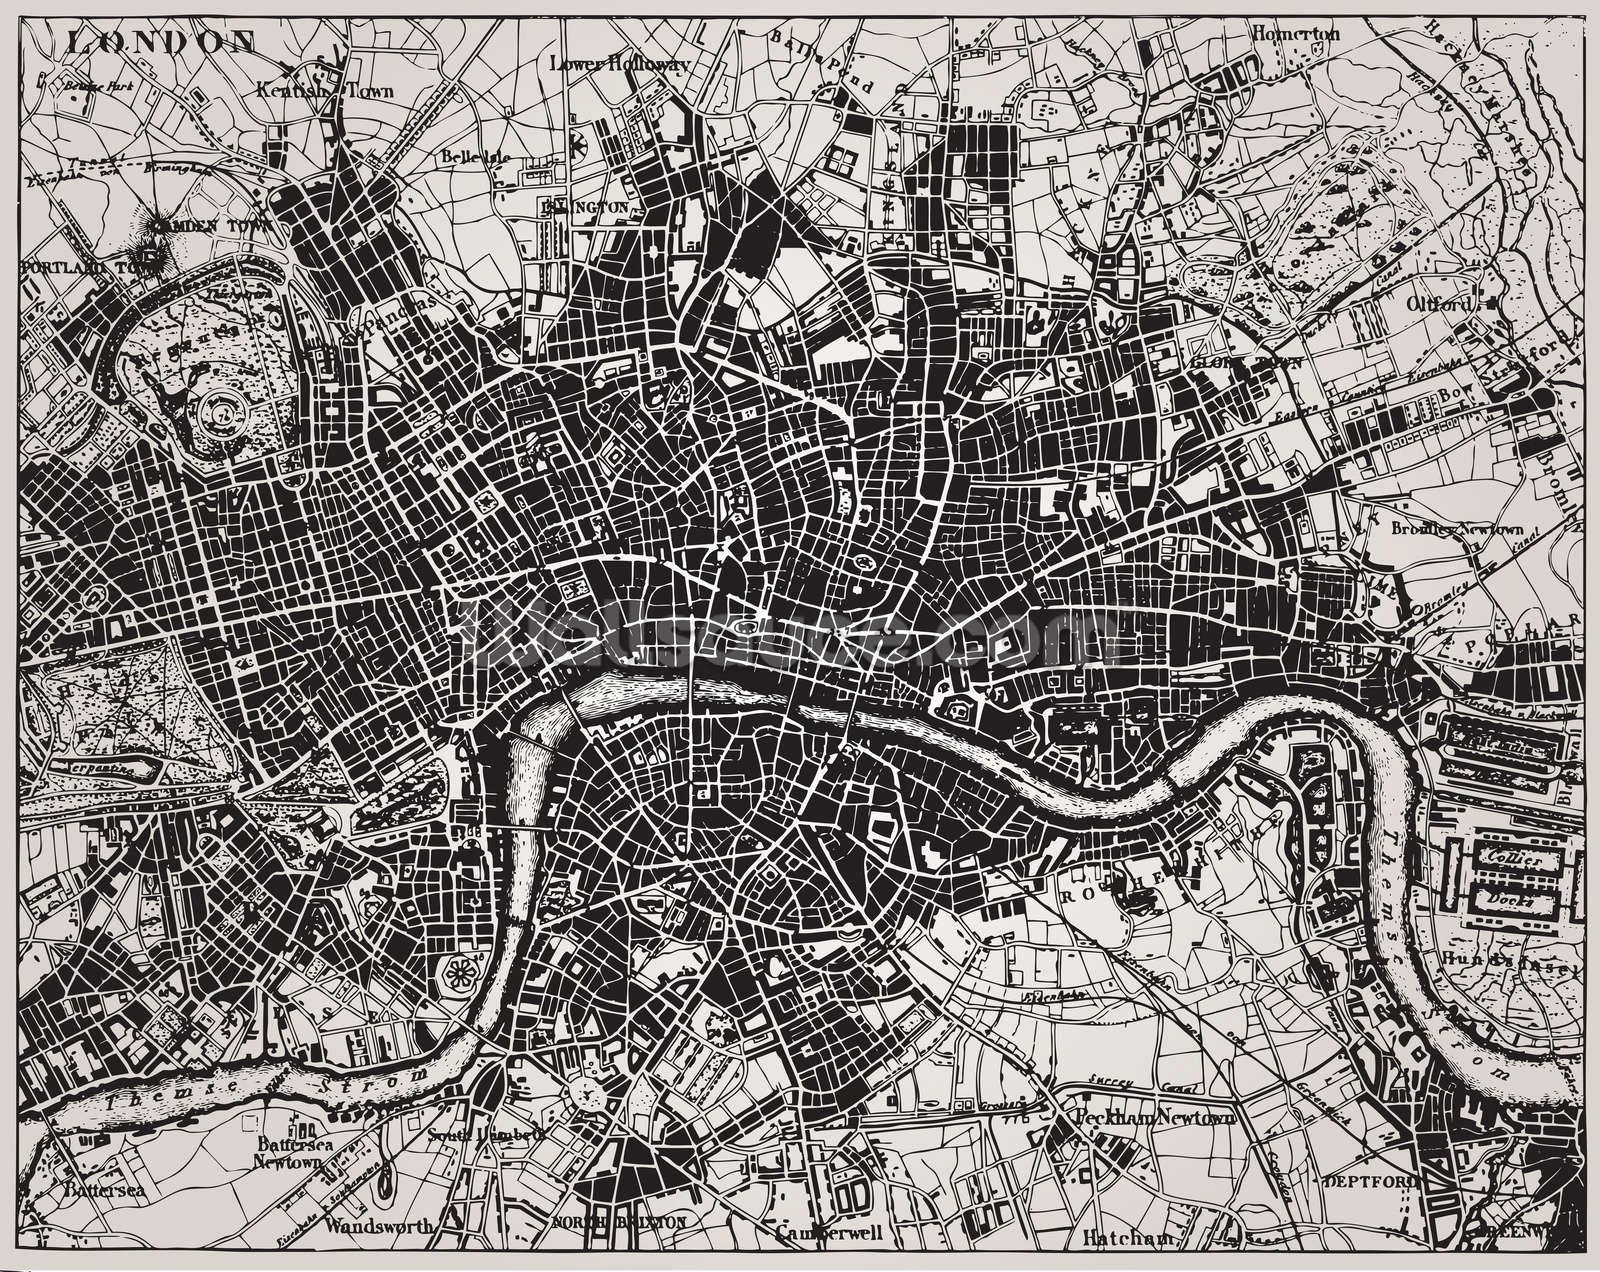 An historic map of London from the Victorian Era.